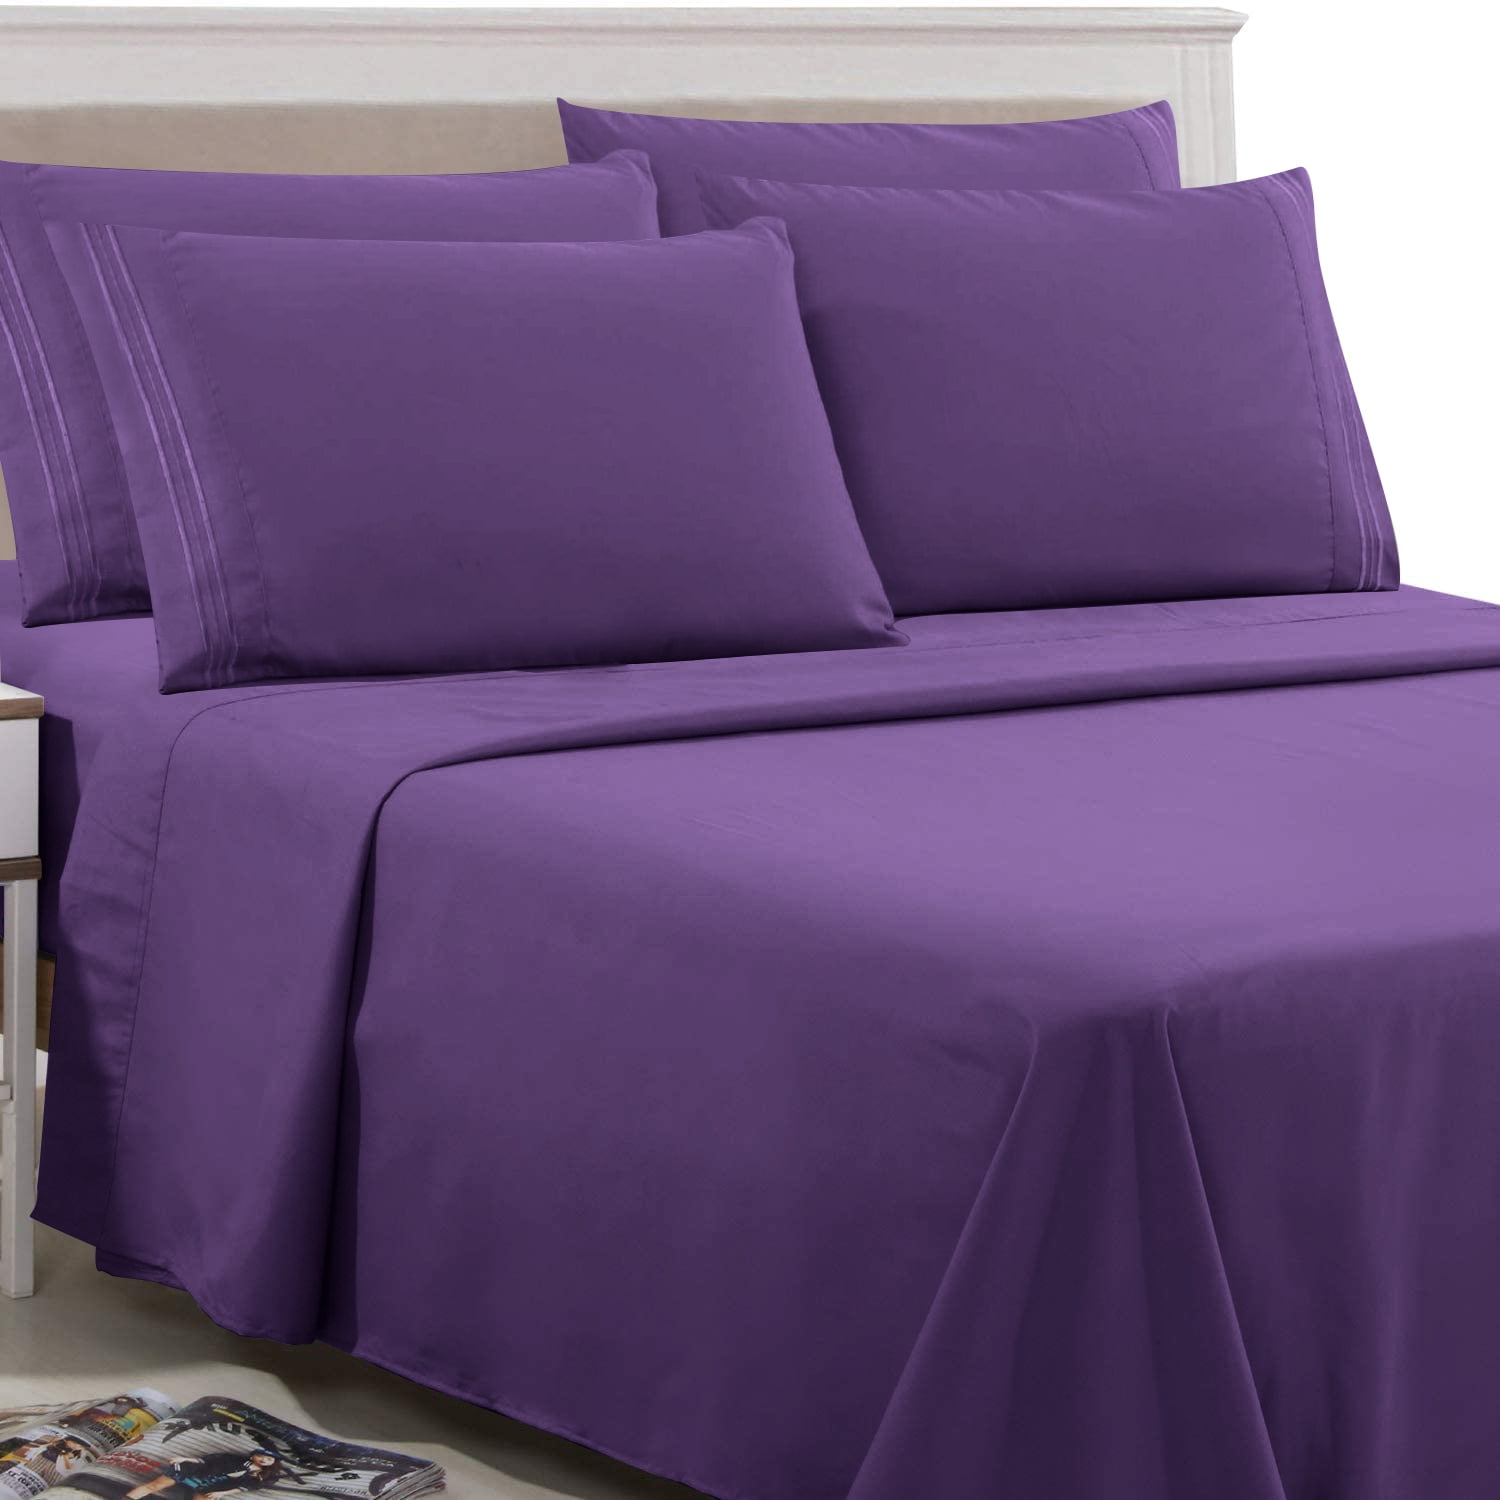 Details about   Queen Sheets Plum 6 Piece 1500 Thread Count Fine Brushed Microfiber Deep Pocke 